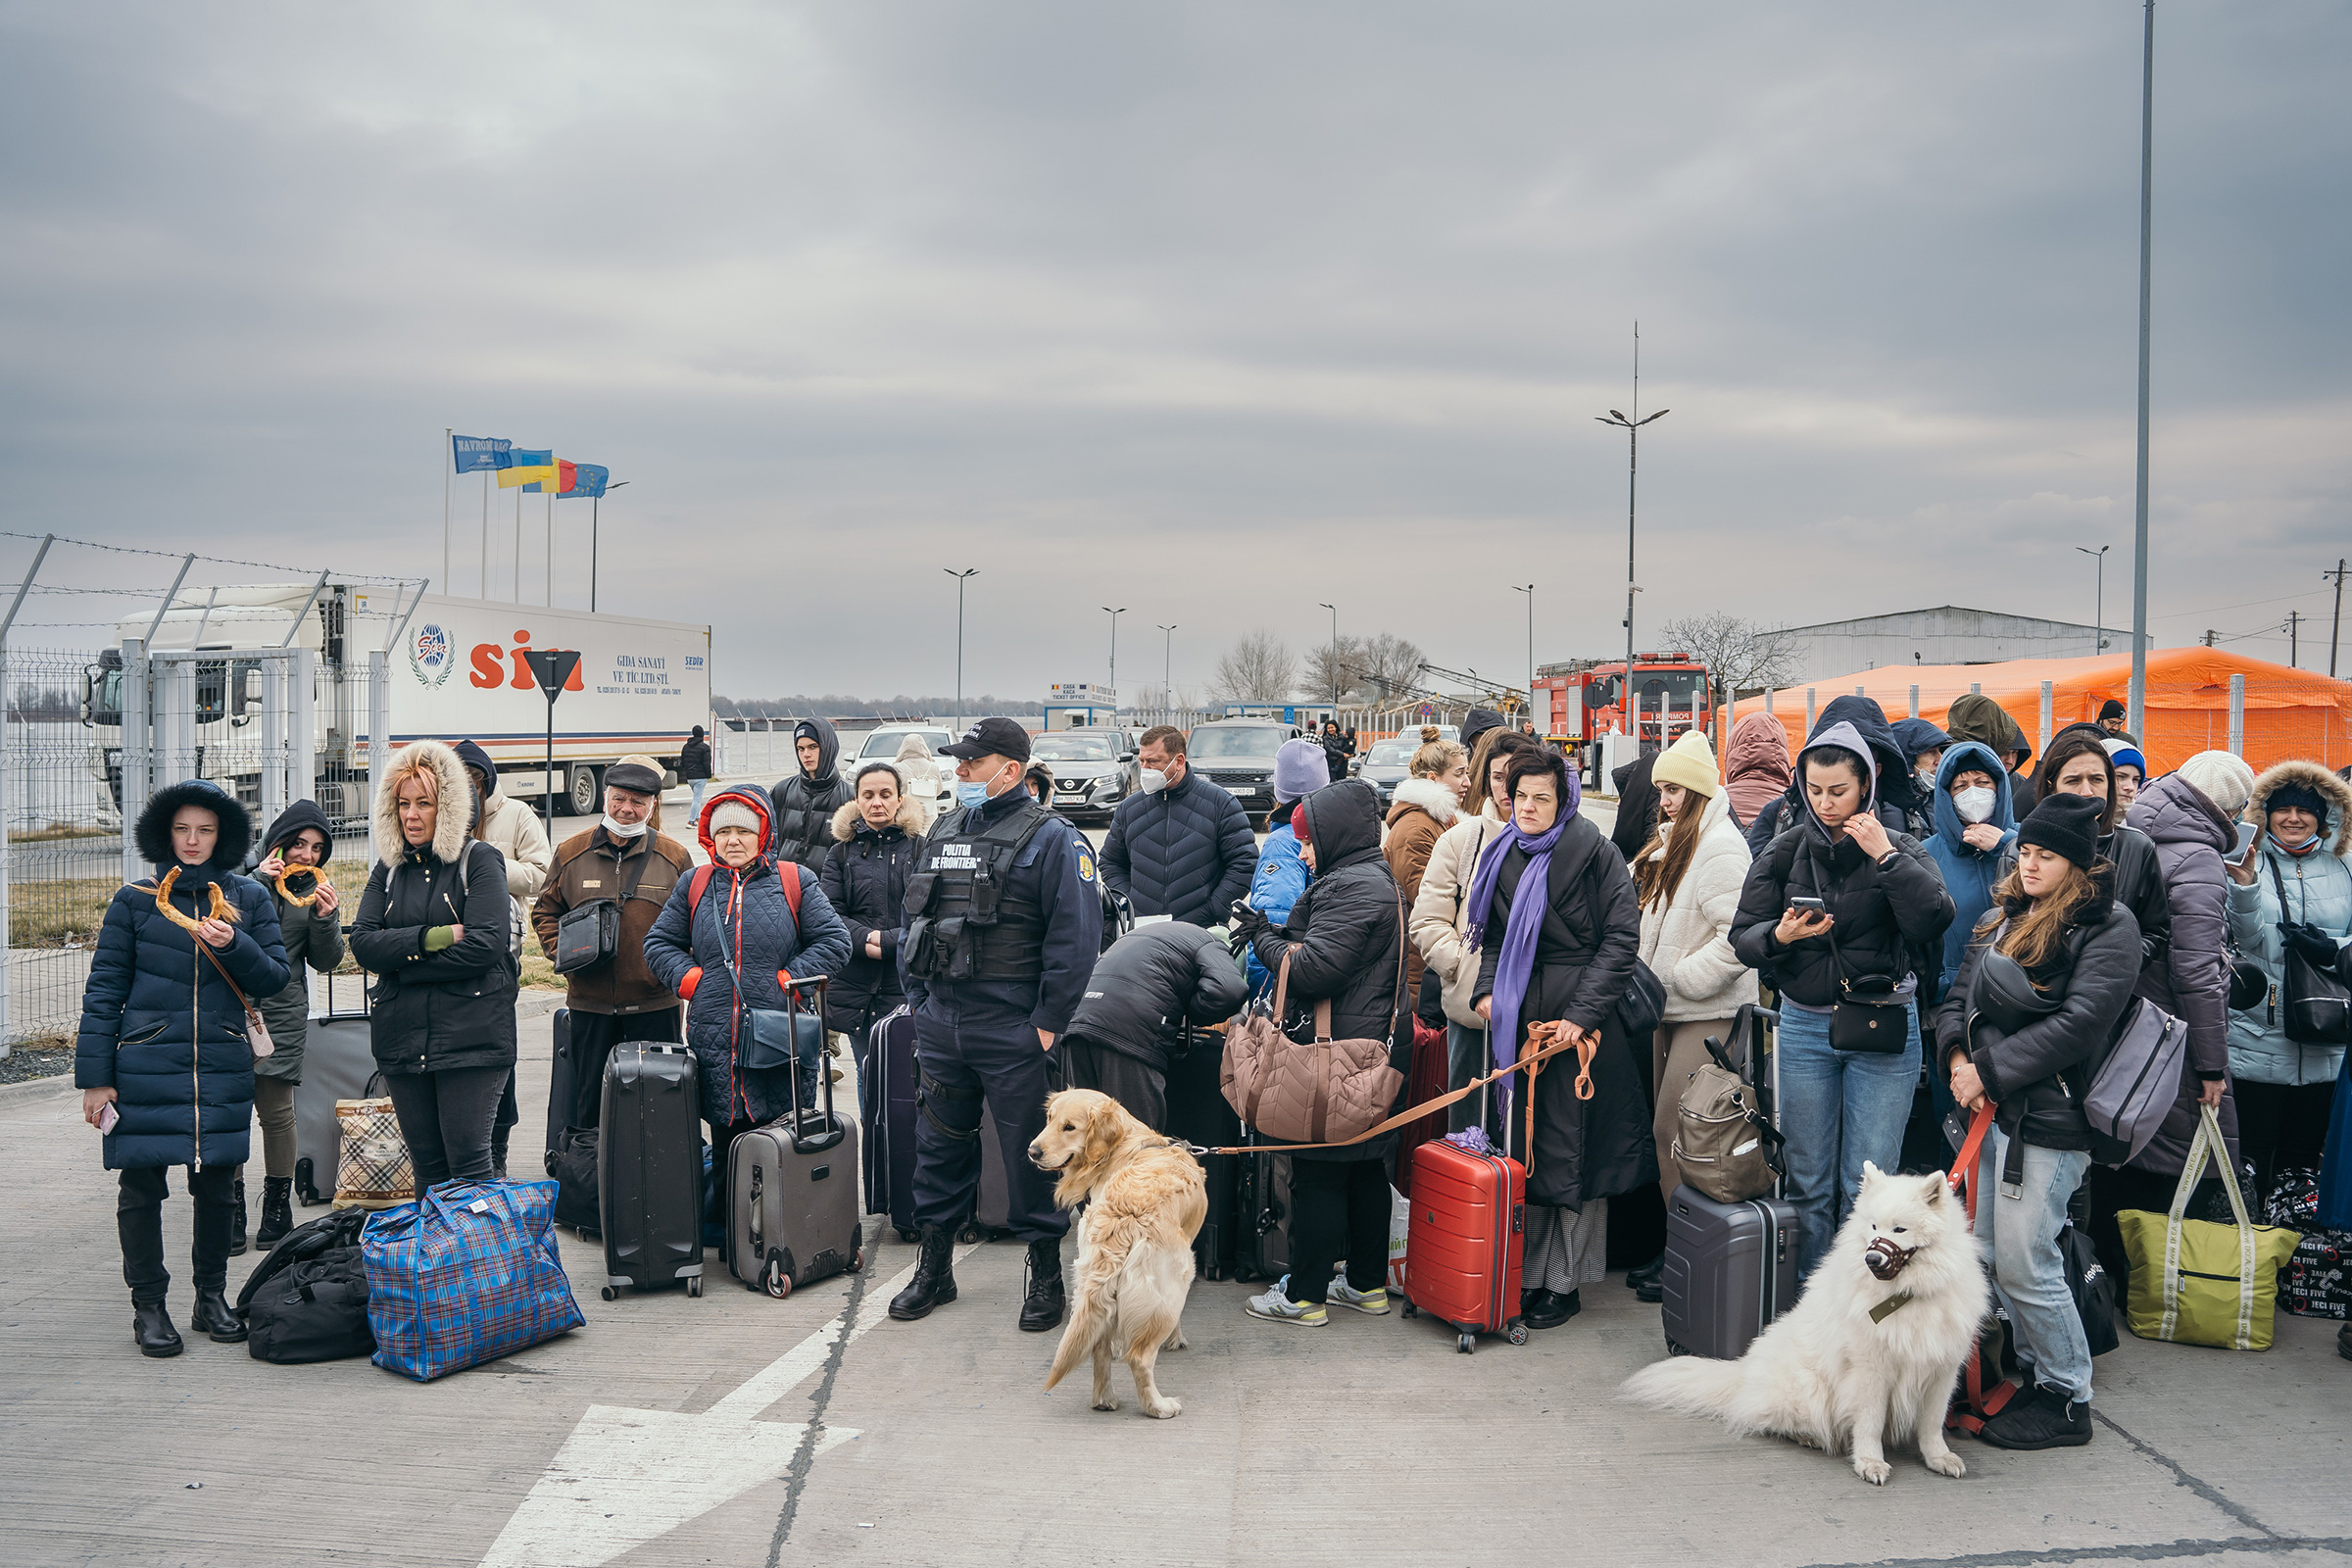 Displaced Ukrainians arrive at a border crossing in Isaccea, Romania, on Feb. 26. In Romania, authorities have dispatched border police, where locals are offering shelter, food, and medicine. (Andrei Pungovschi—Bloomberg/Getty Images)